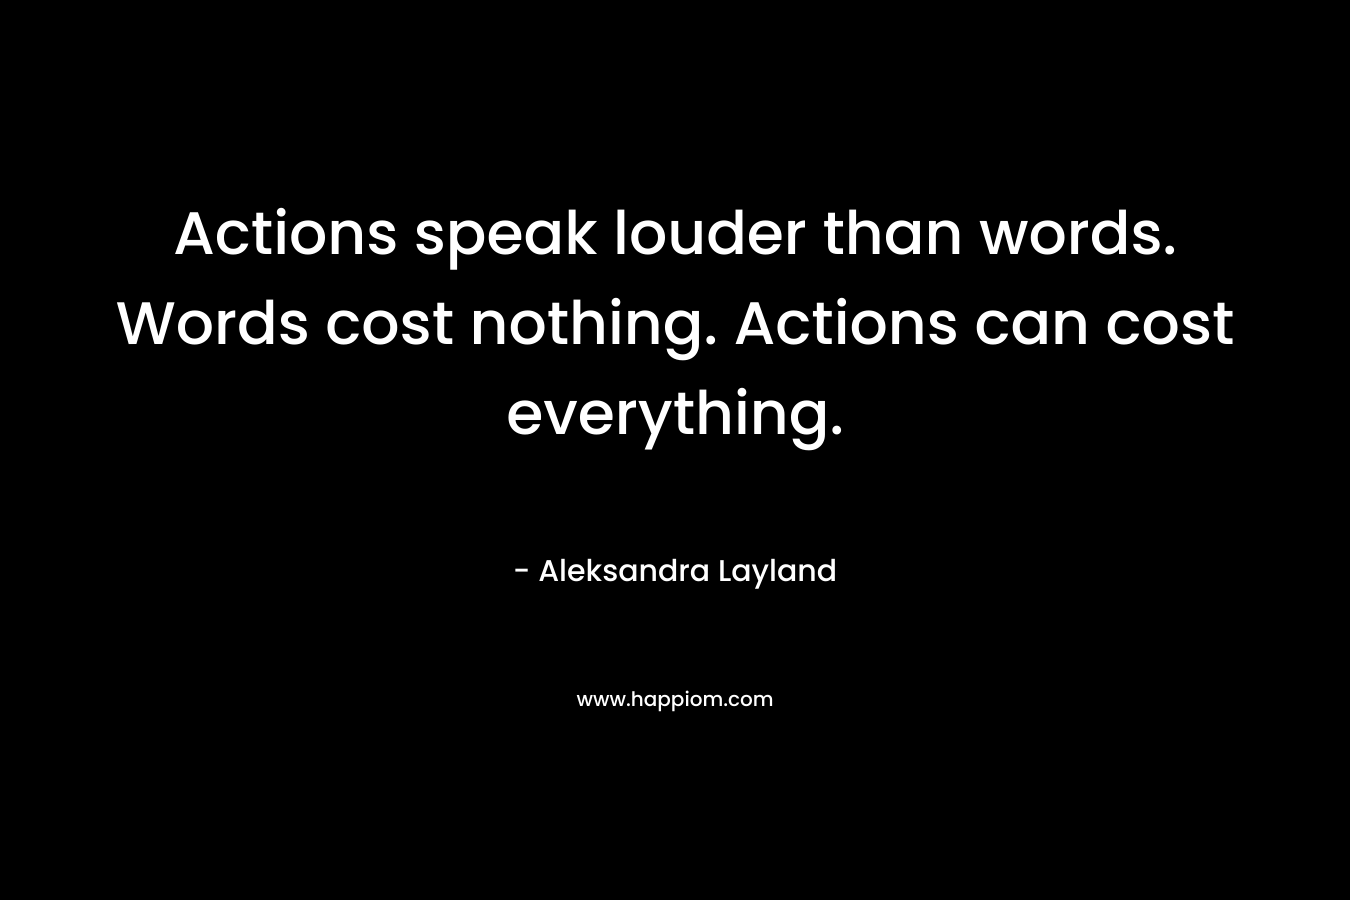 Actions speak louder than words. Words cost nothing. Actions can cost everything.